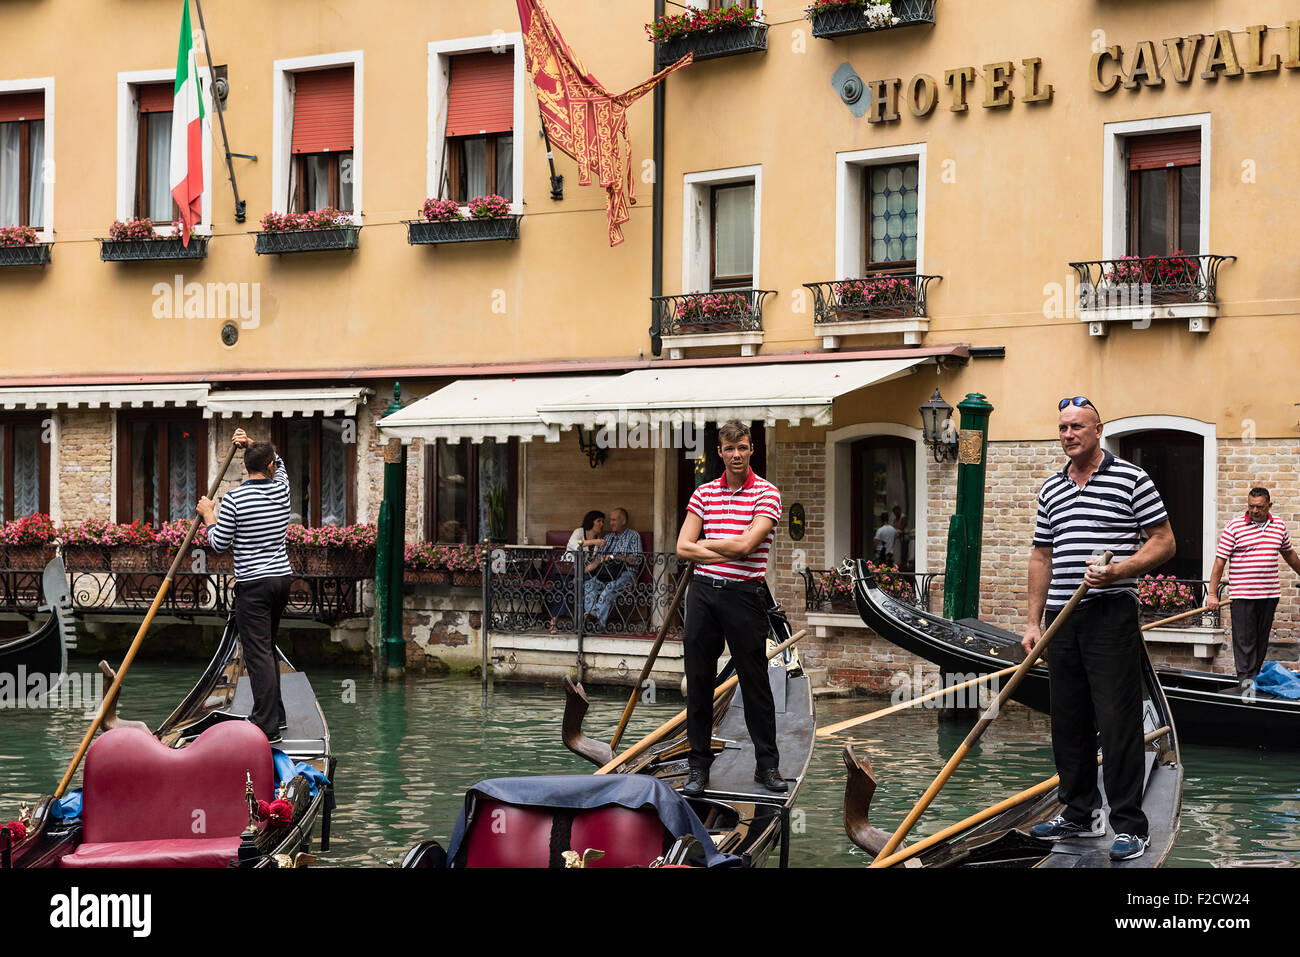 Gondoliers waiting for customers, Venice, Italy Stock Photo